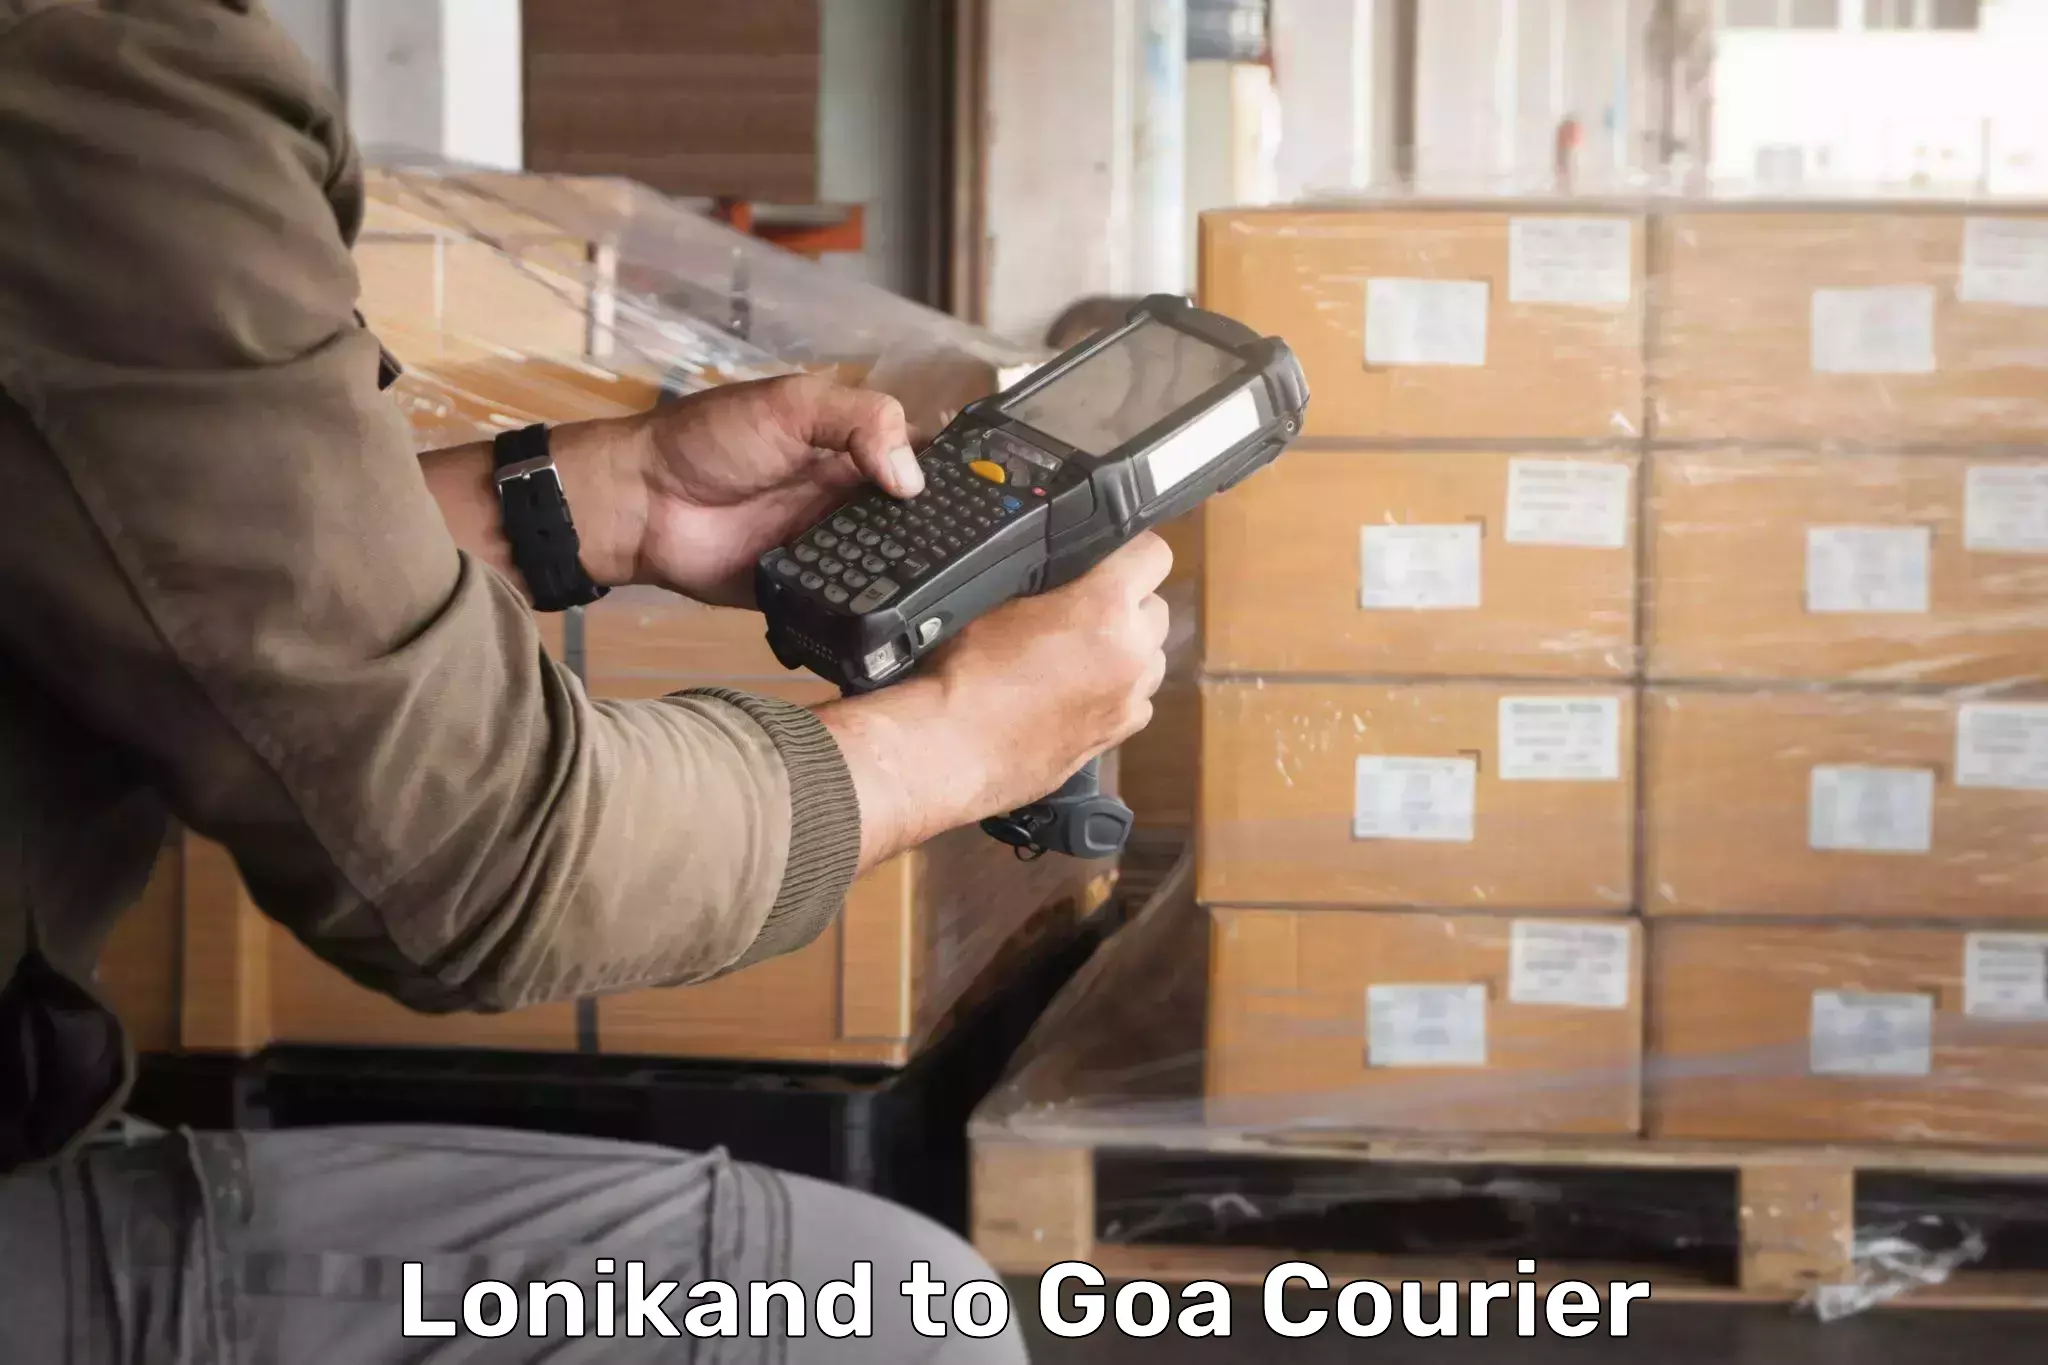 Global courier networks Lonikand to Goa